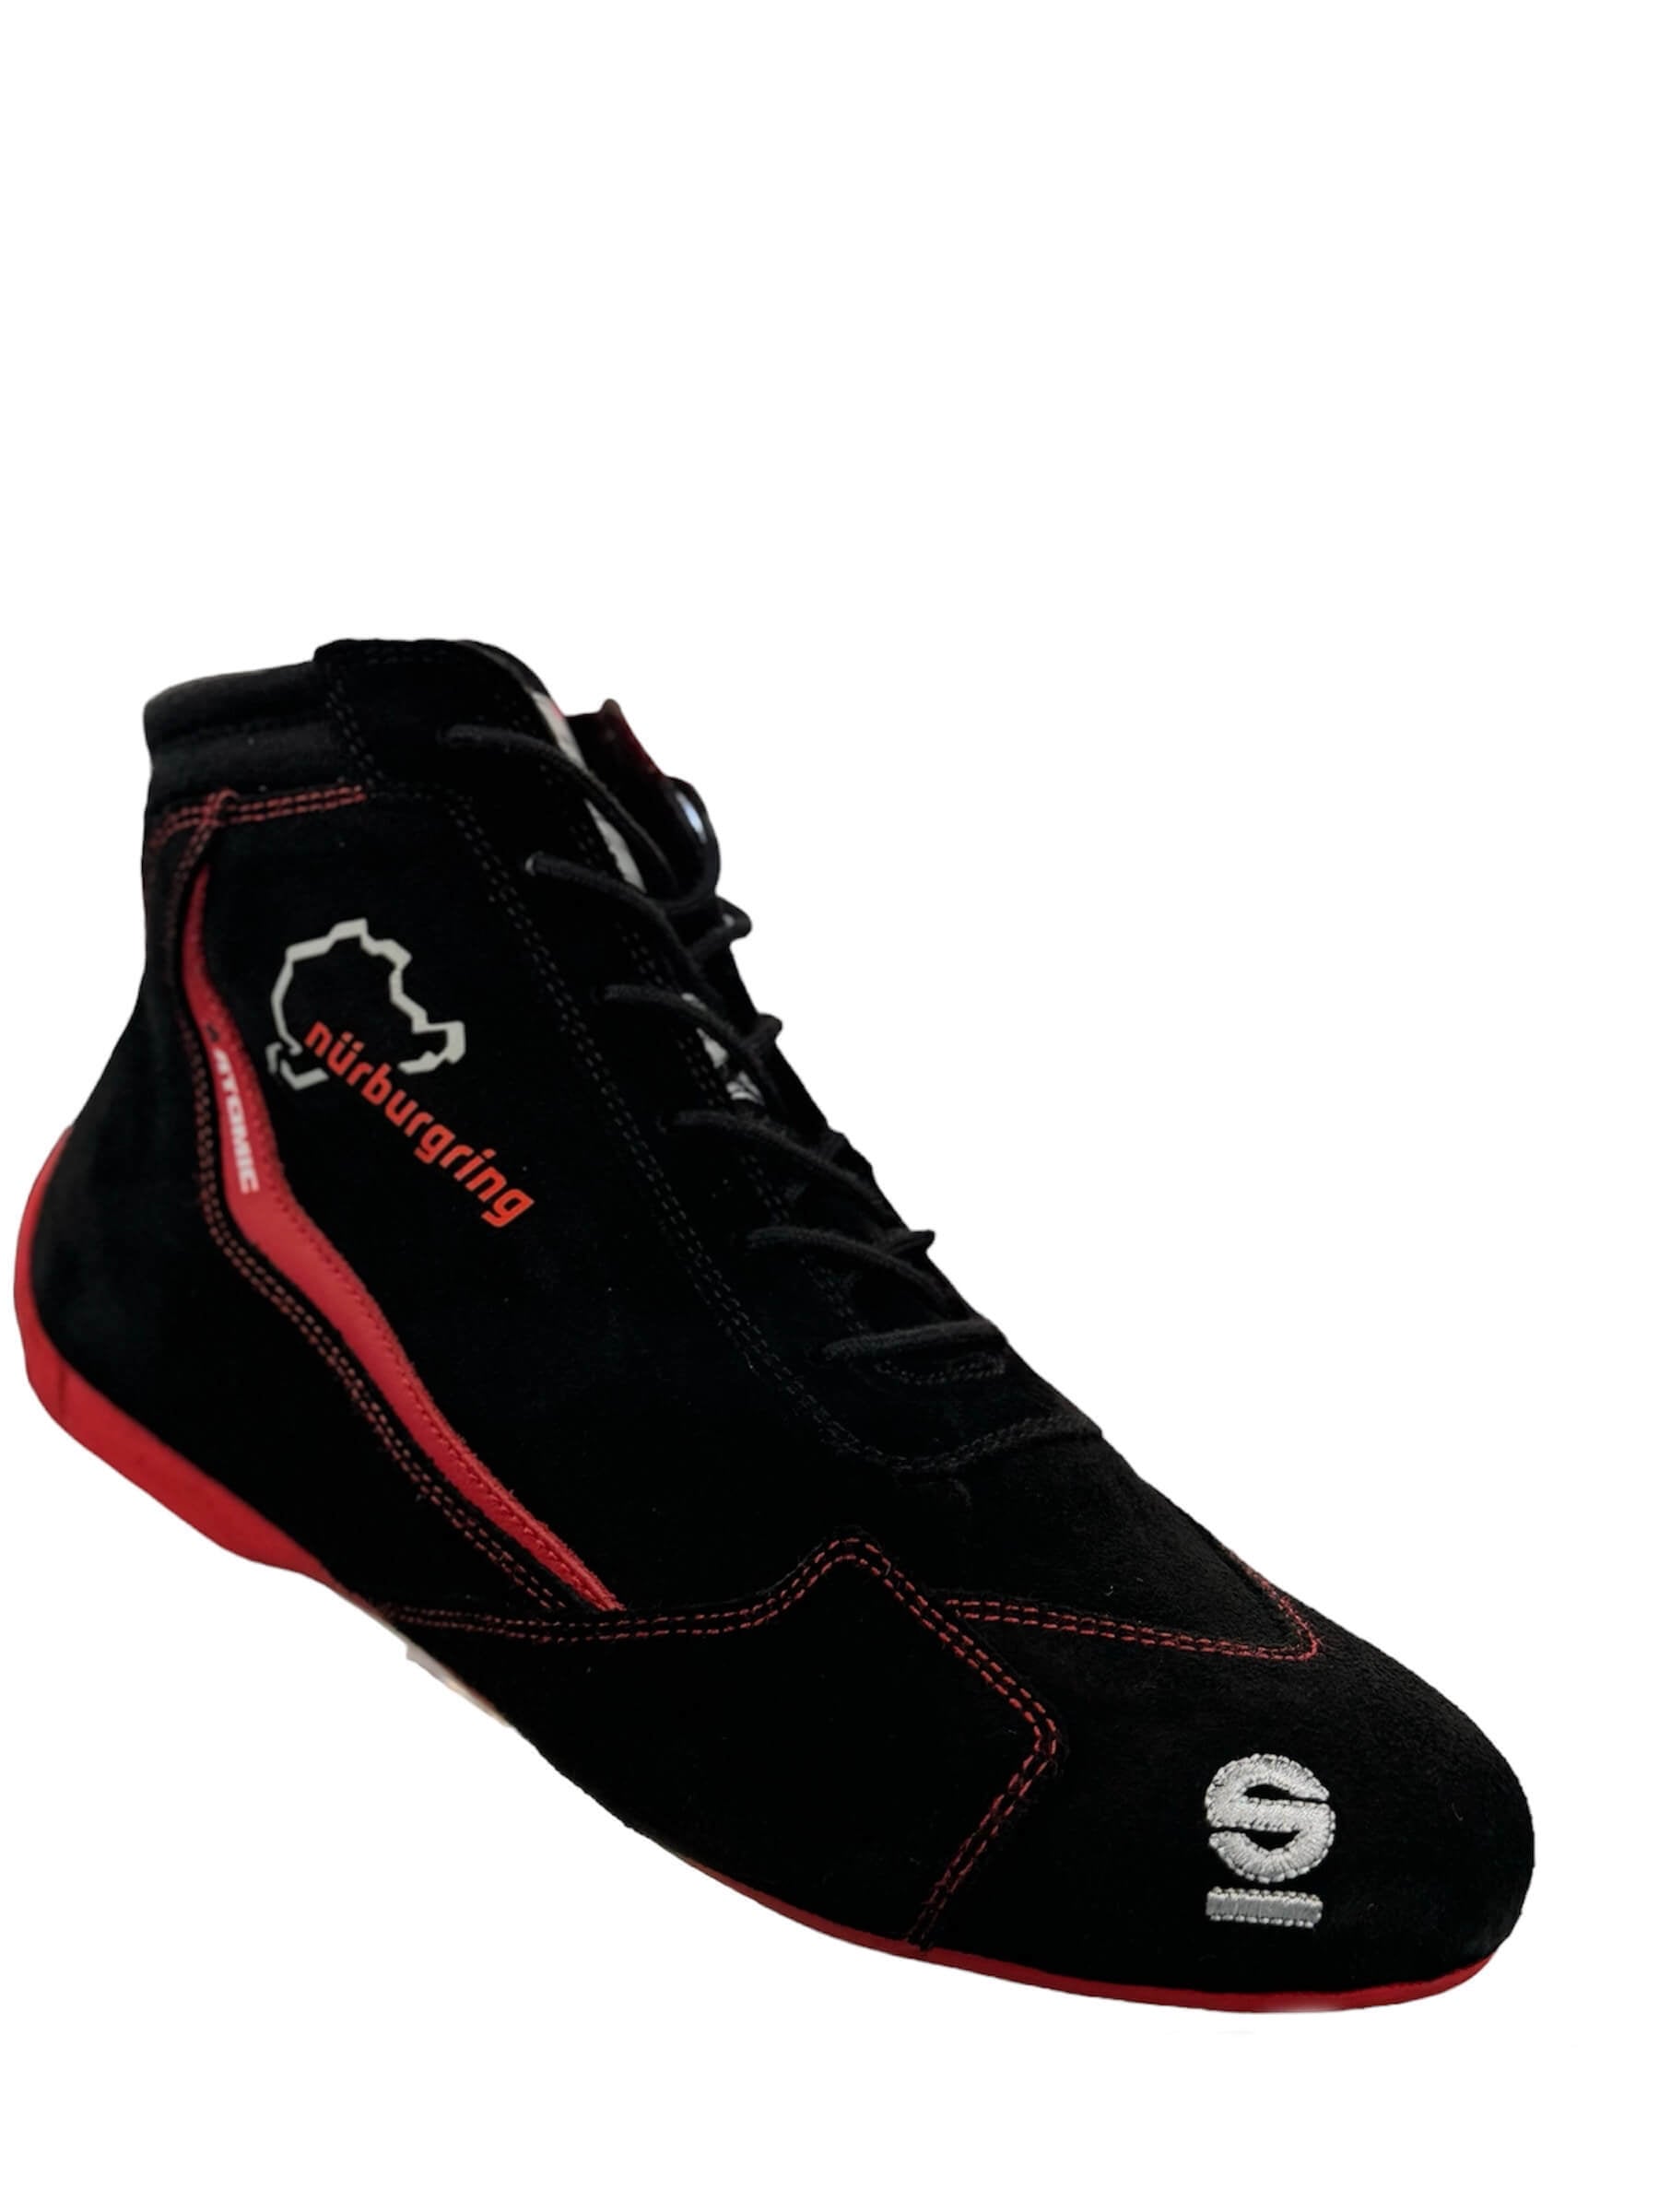 SPARCO 001295SP_NBR46 Shoes Slalom Nurburgring Edition black/red Size 46 Photo-0 